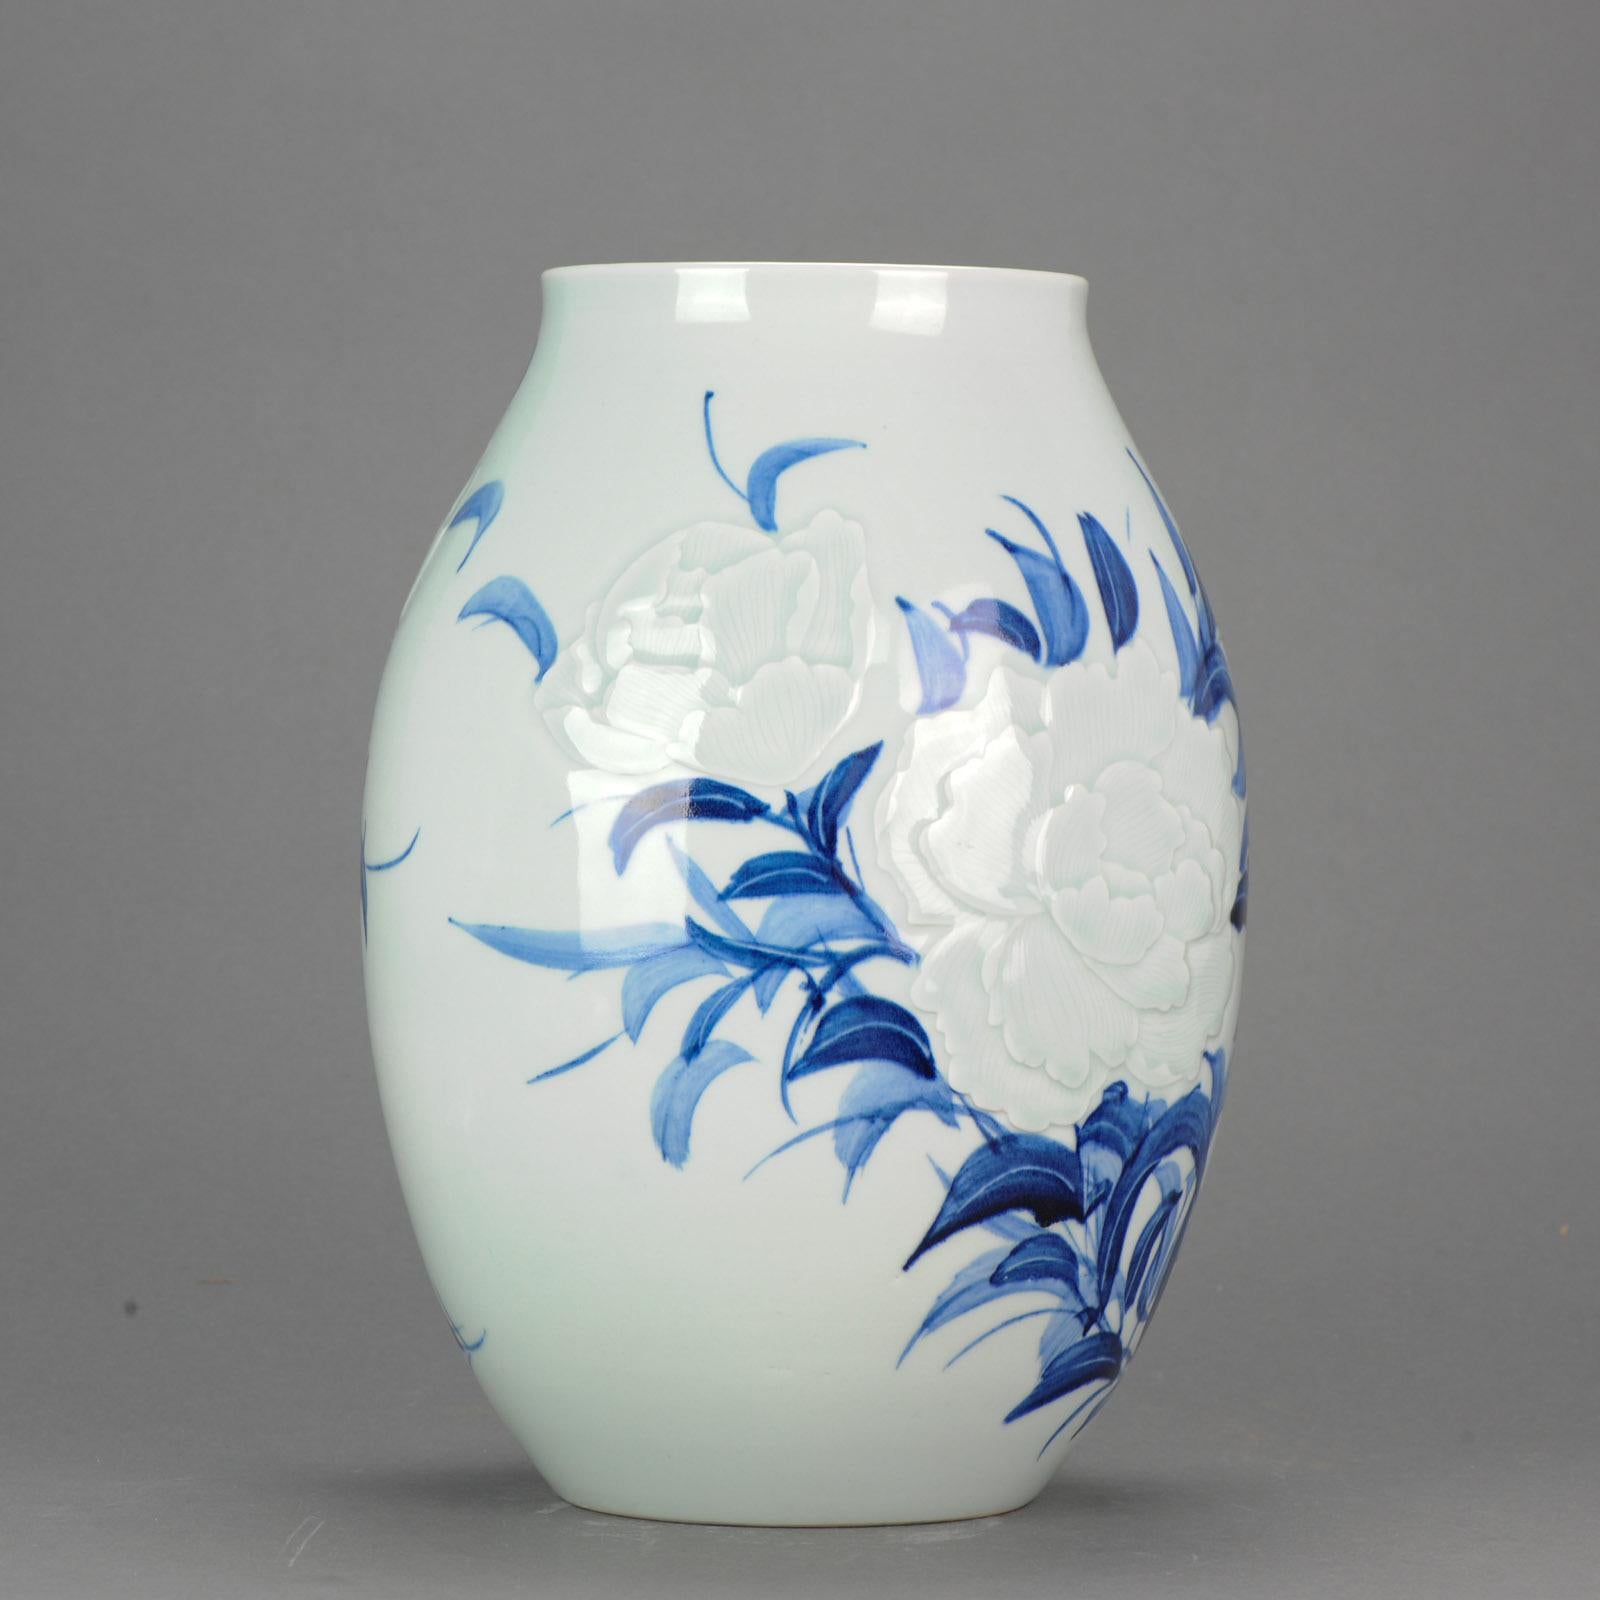 Wanglin '1972' Artist Mark Celadon Anhua Vase Dated 2001 Chinese Porcelain Vase For Sale 3